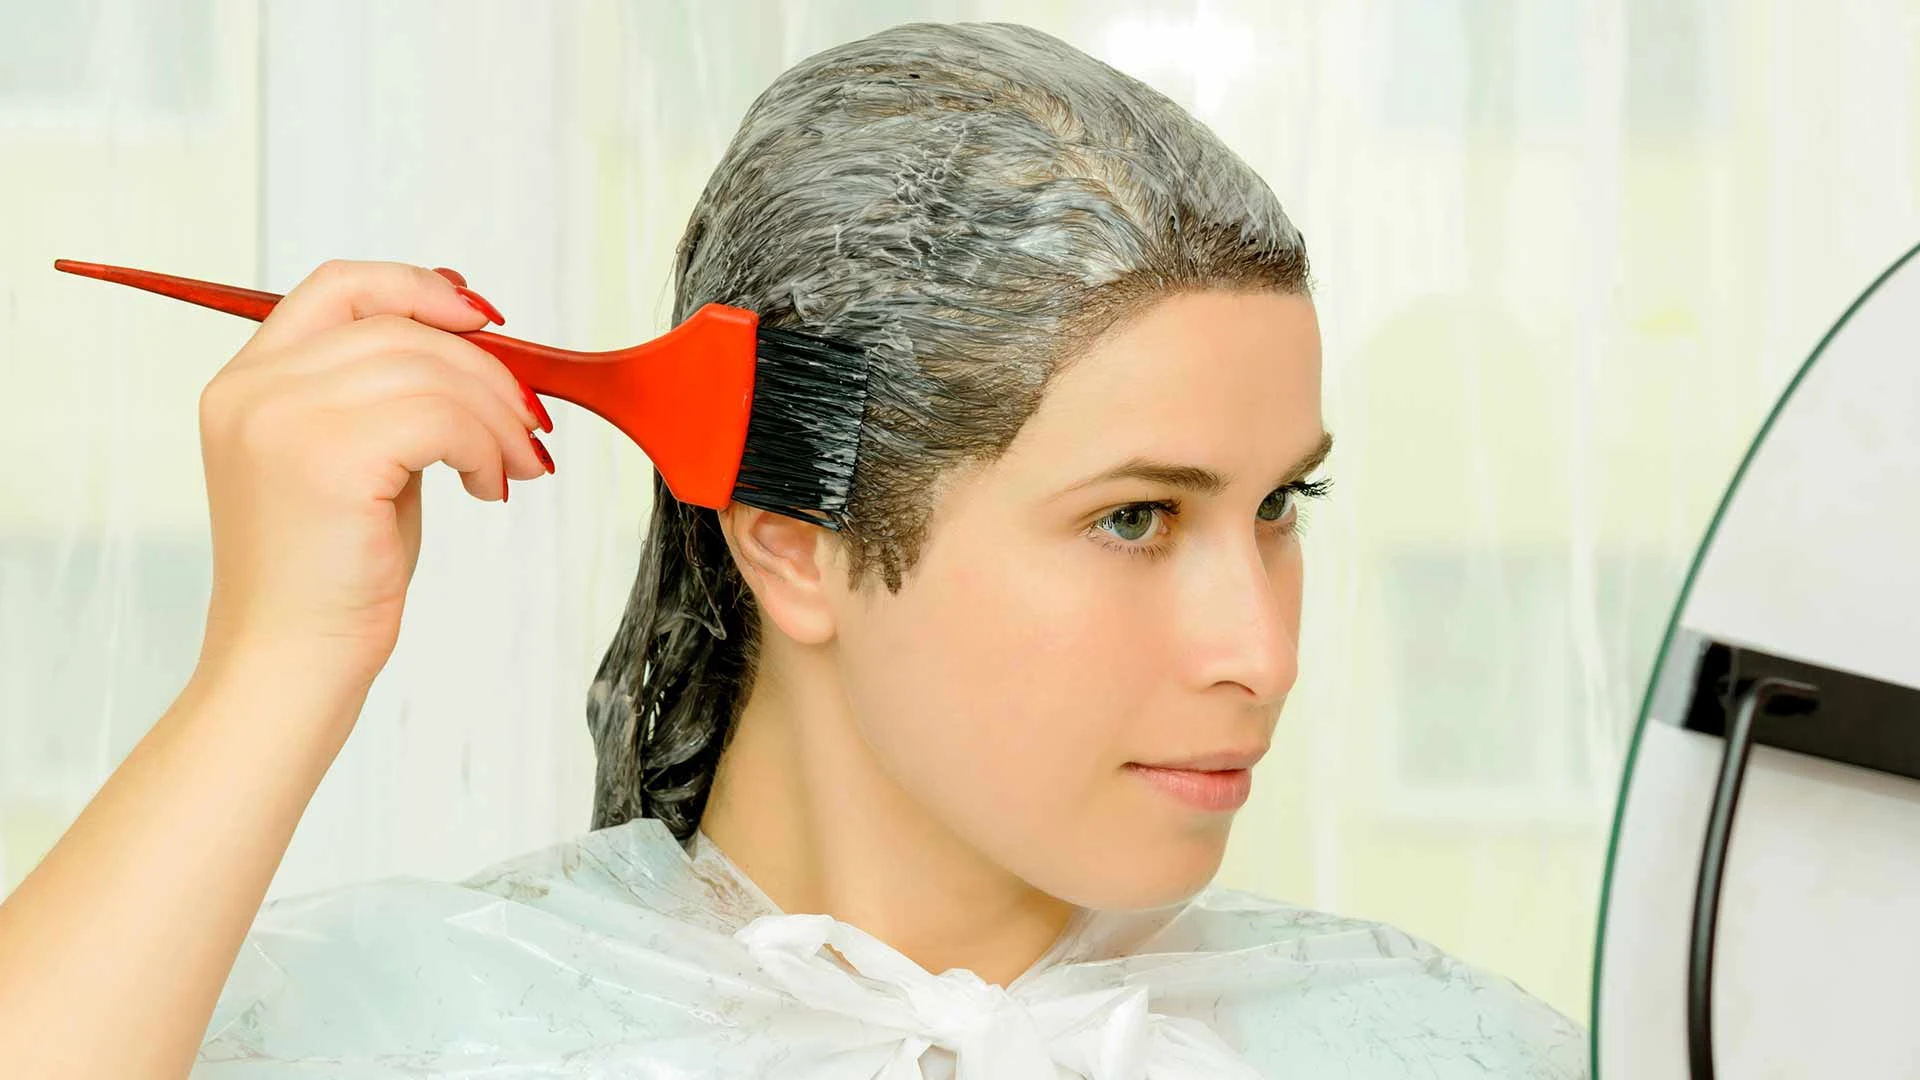 How To Dye Your Hair at Home